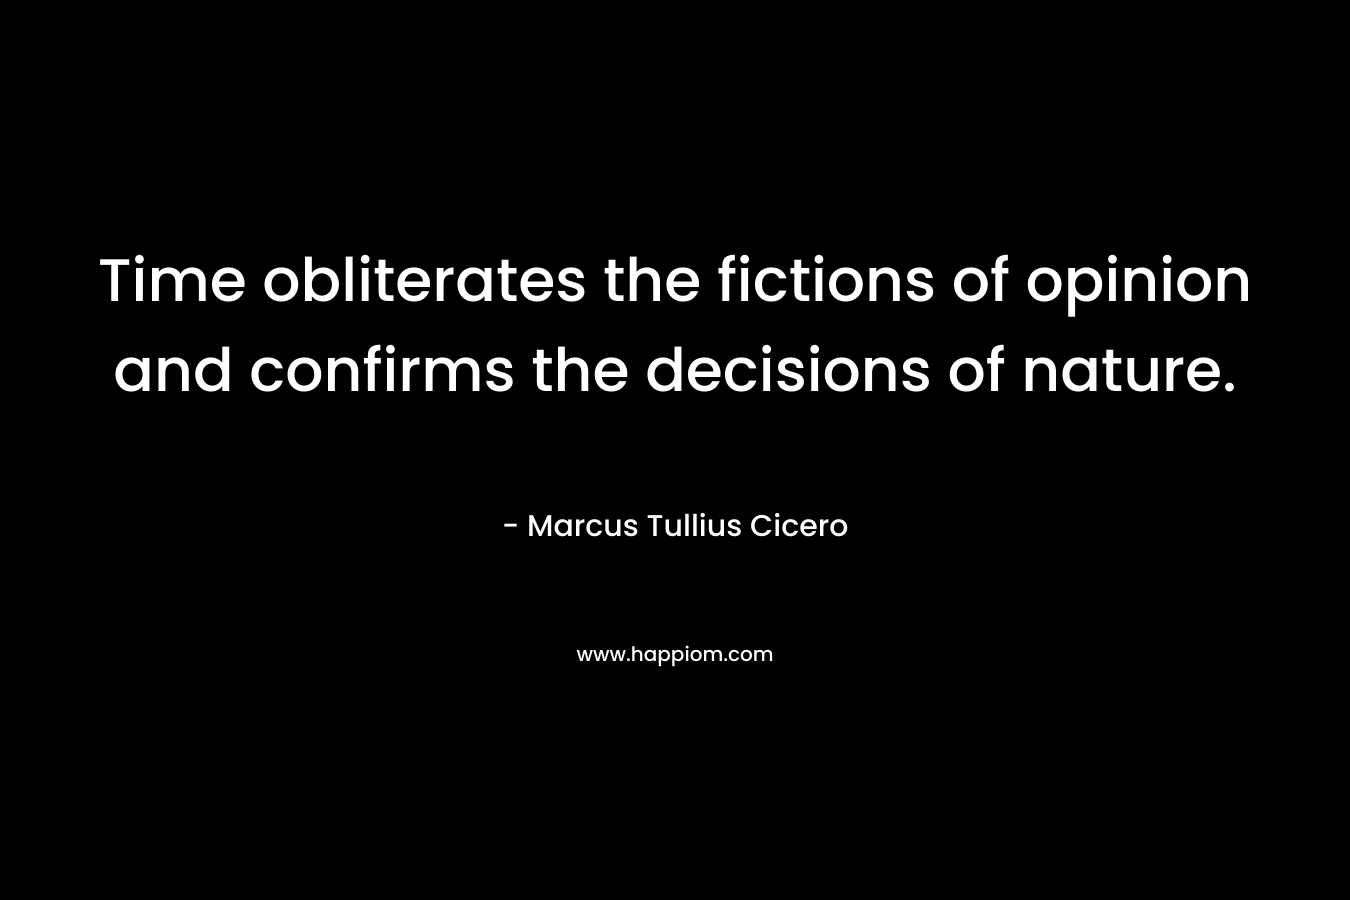 Time obliterates the fictions of opinion and confirms the decisions of nature.